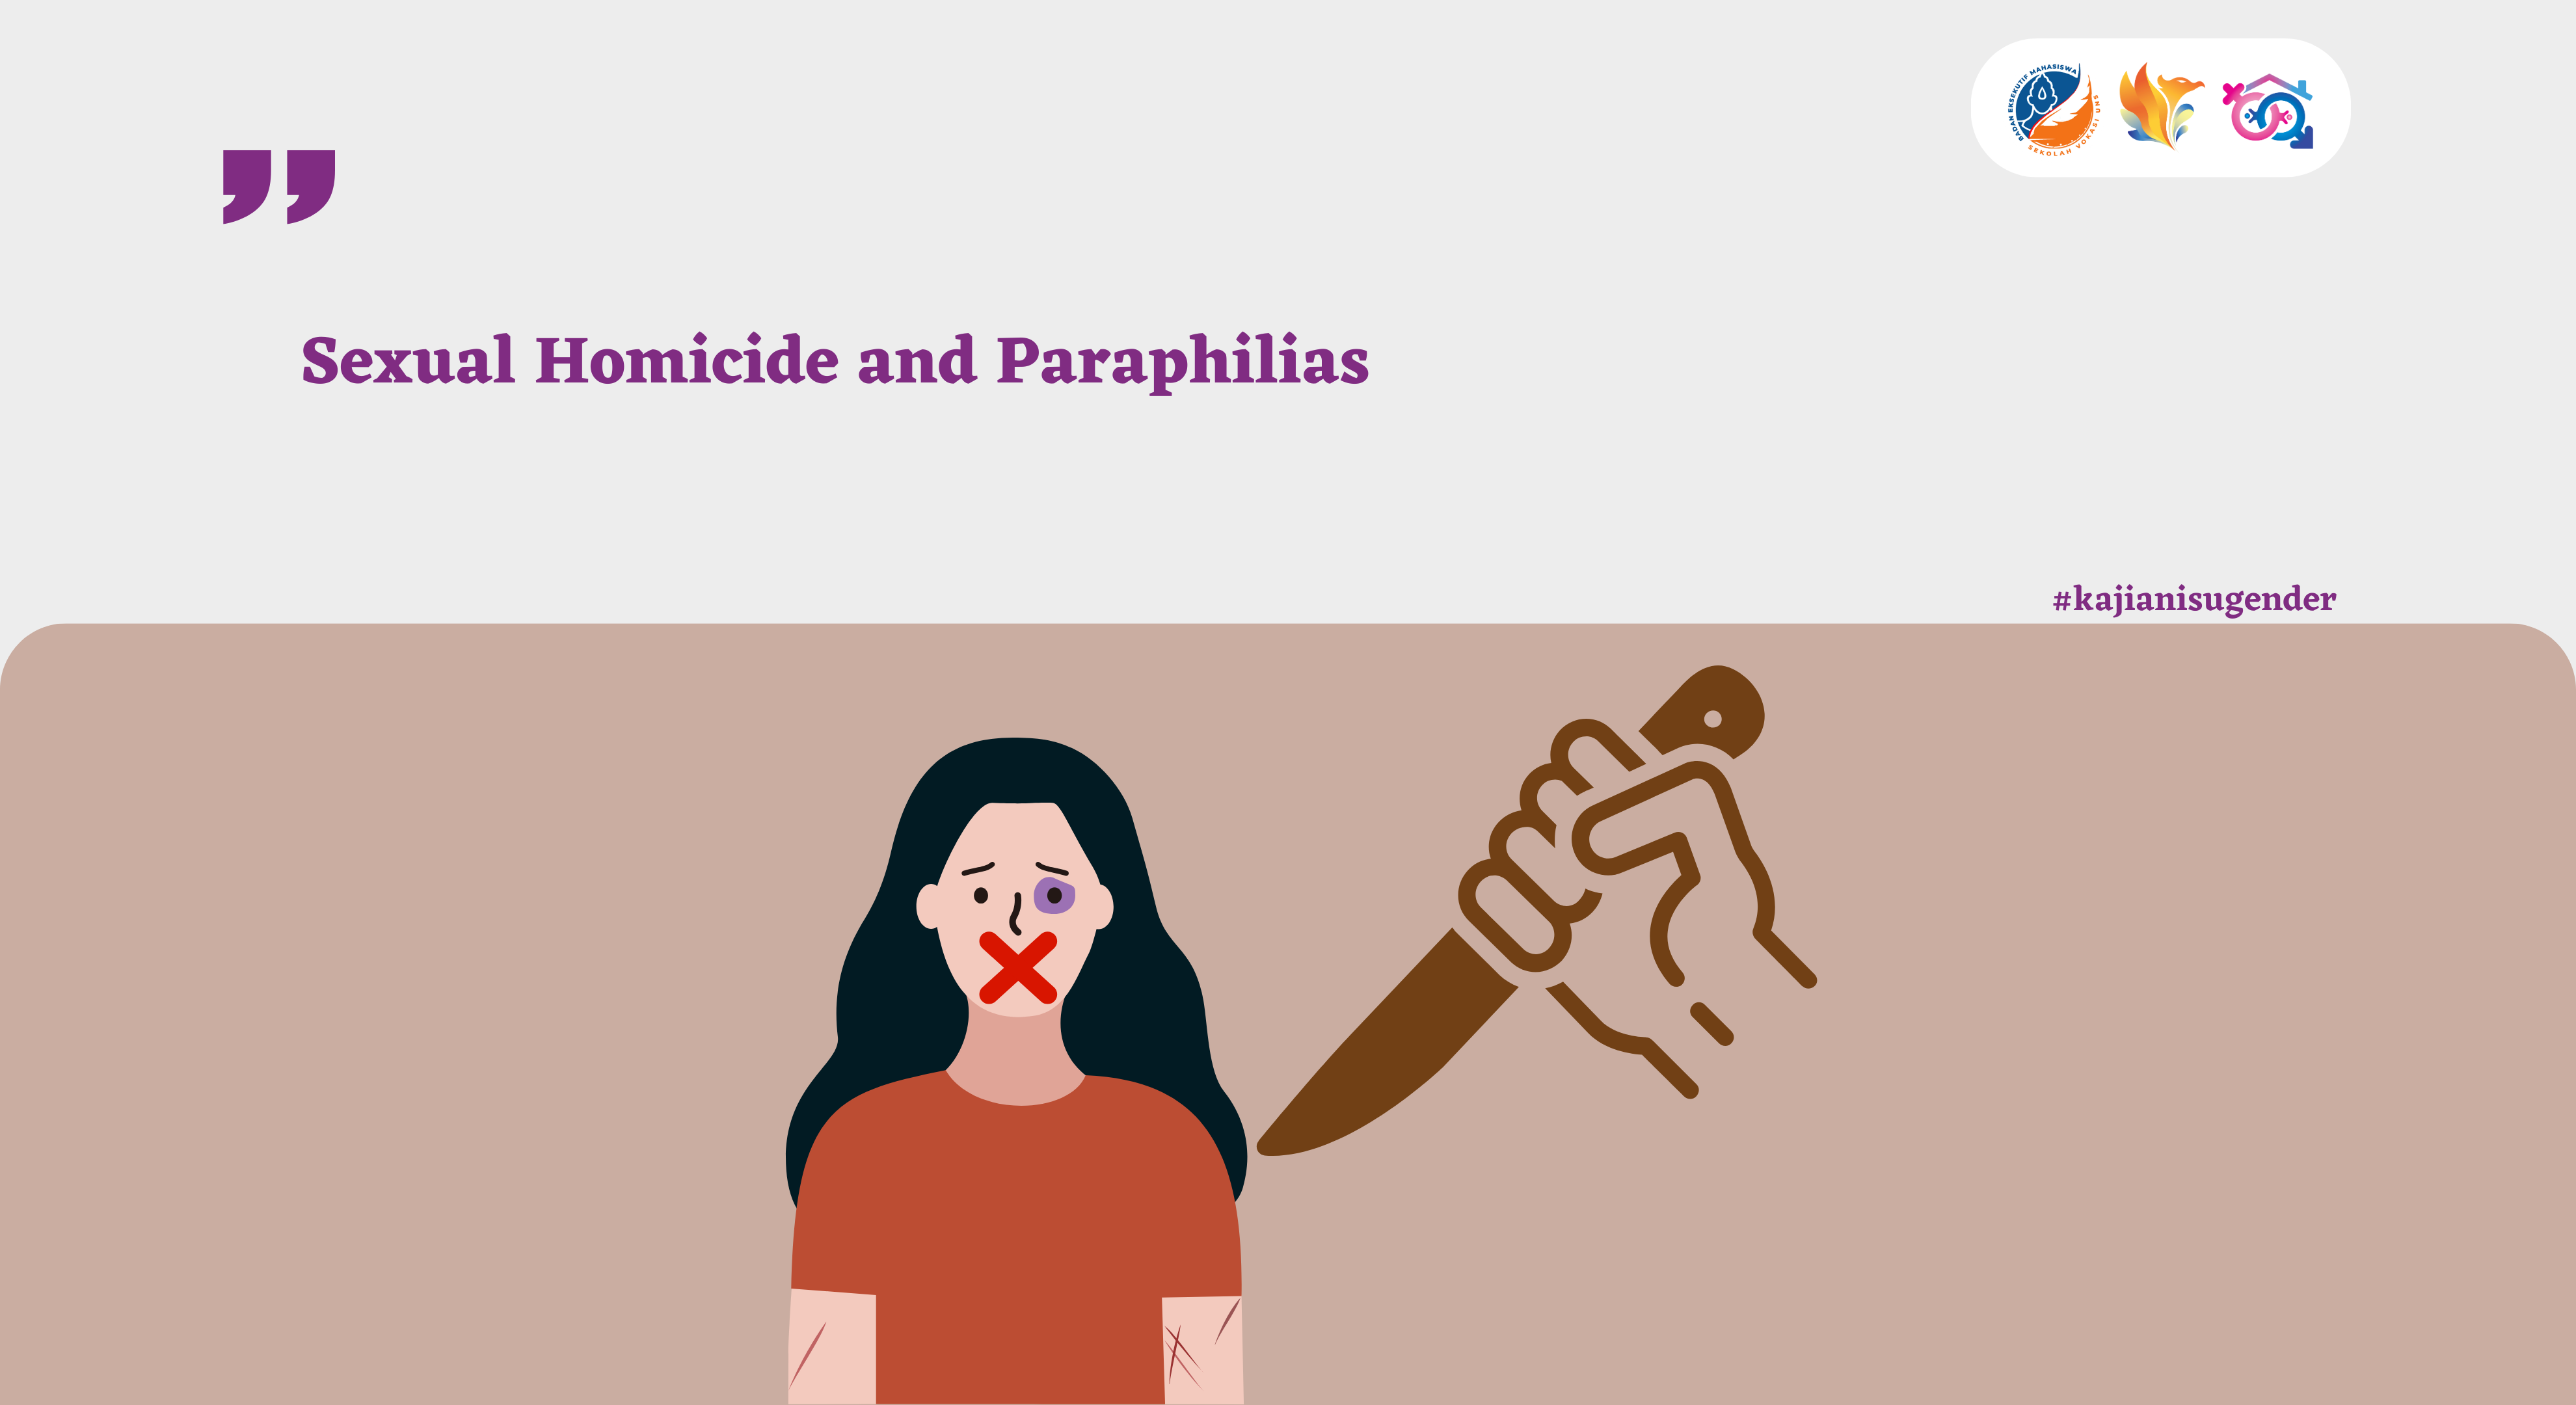 Sexual Homicide and Paraphilias